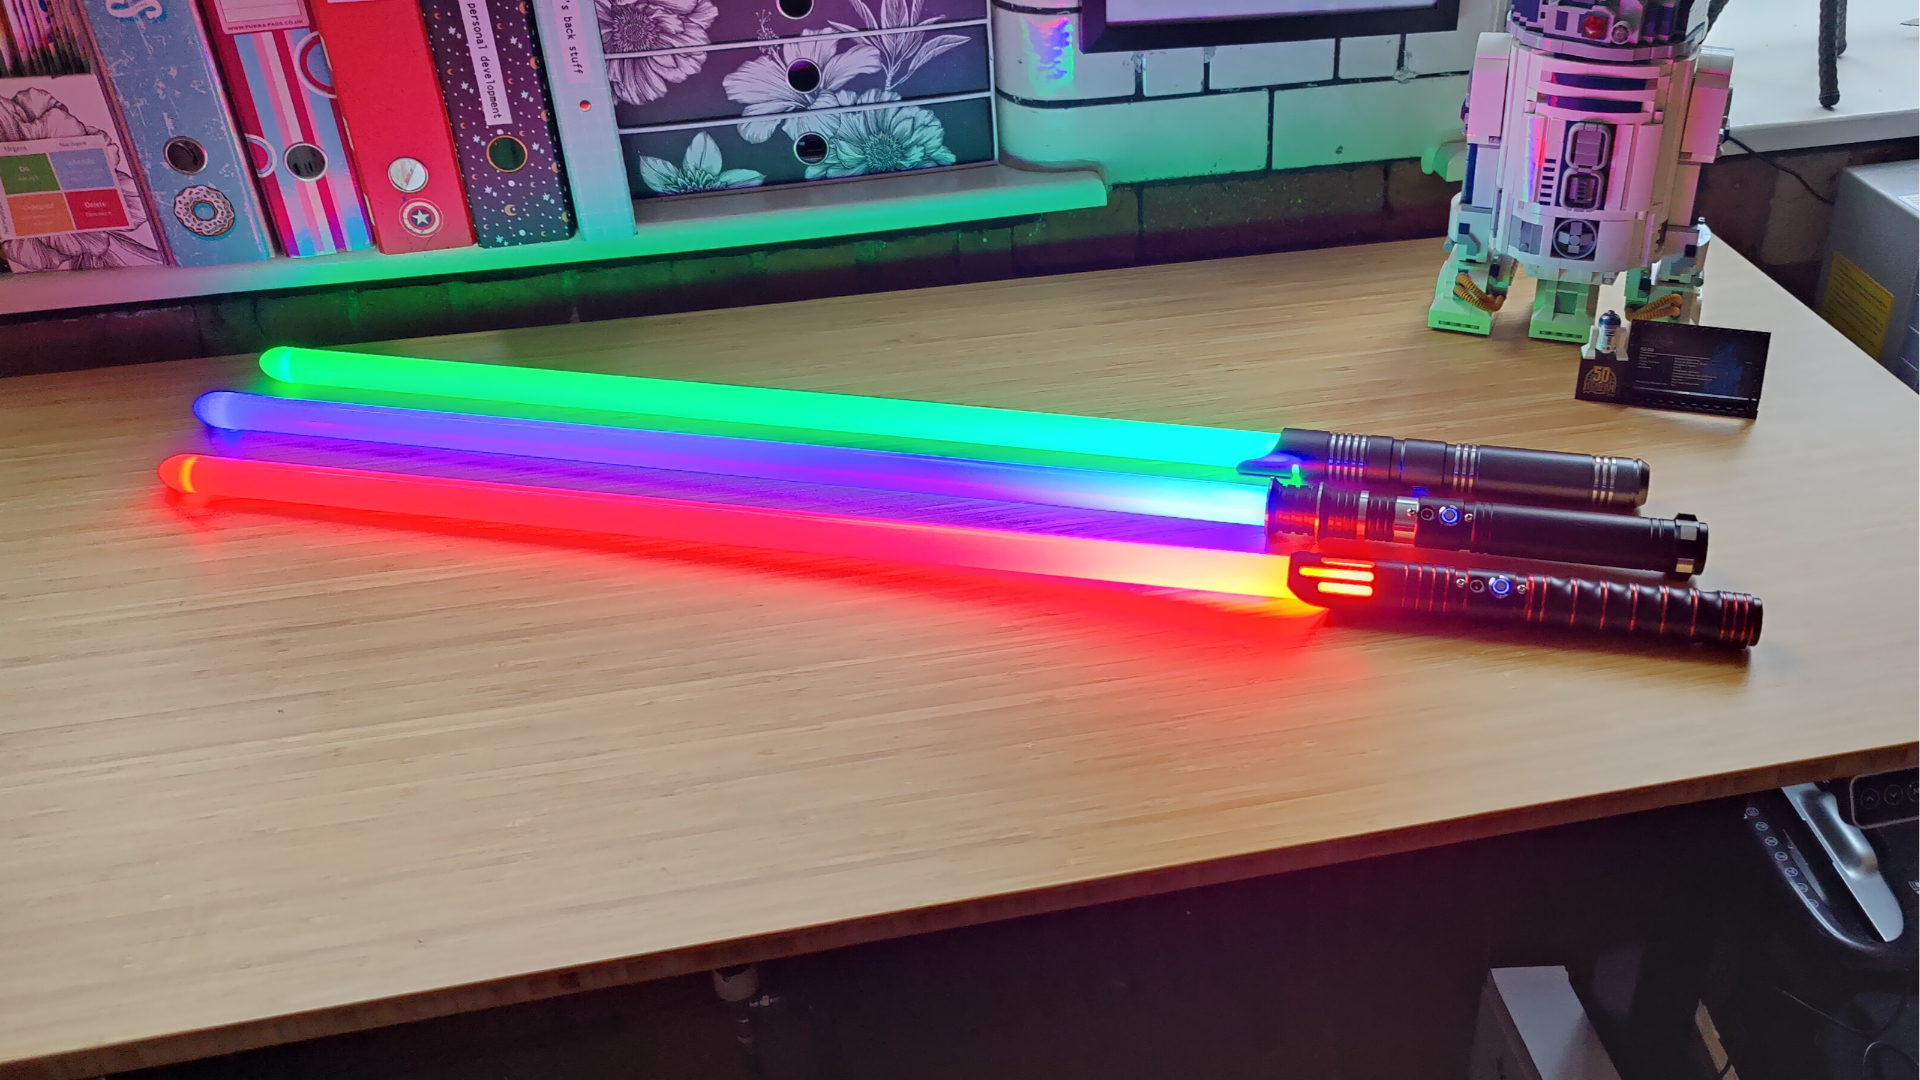 Encalife Lightsabers review: push the button and let it glow